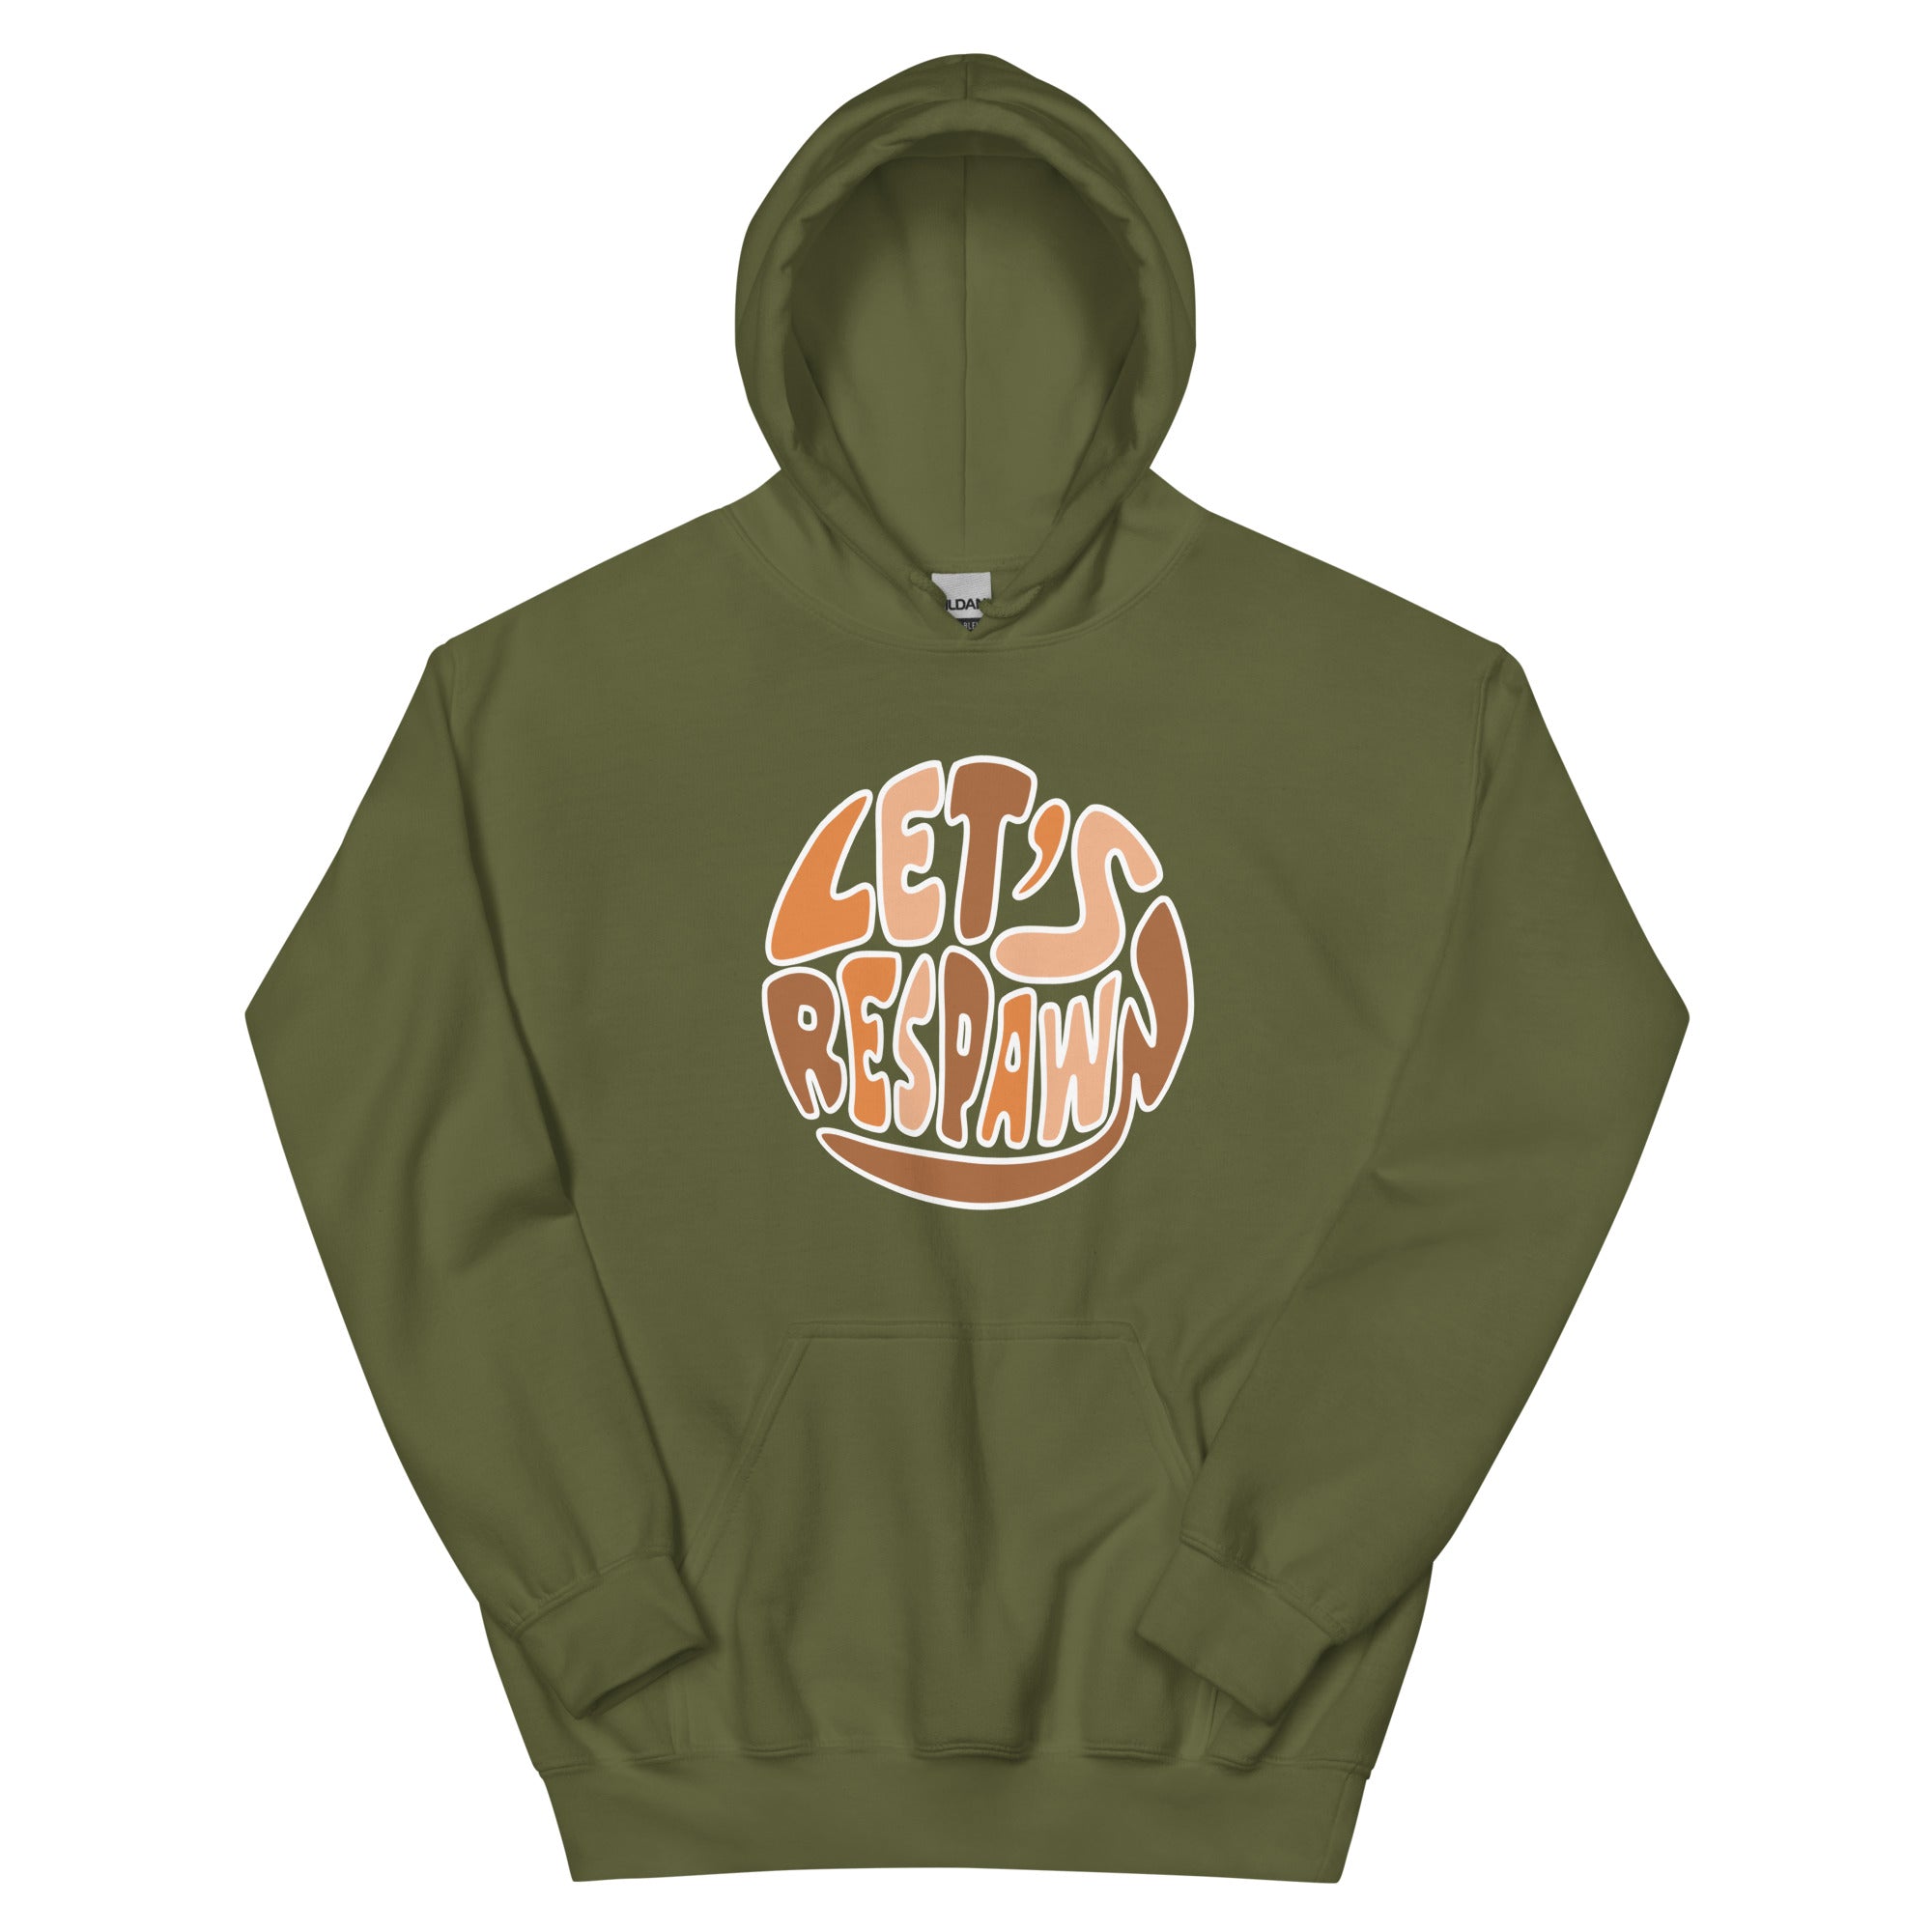 Let's Respawn | Unisex Hoodie Threads and Thistles Inventory Military Green S 